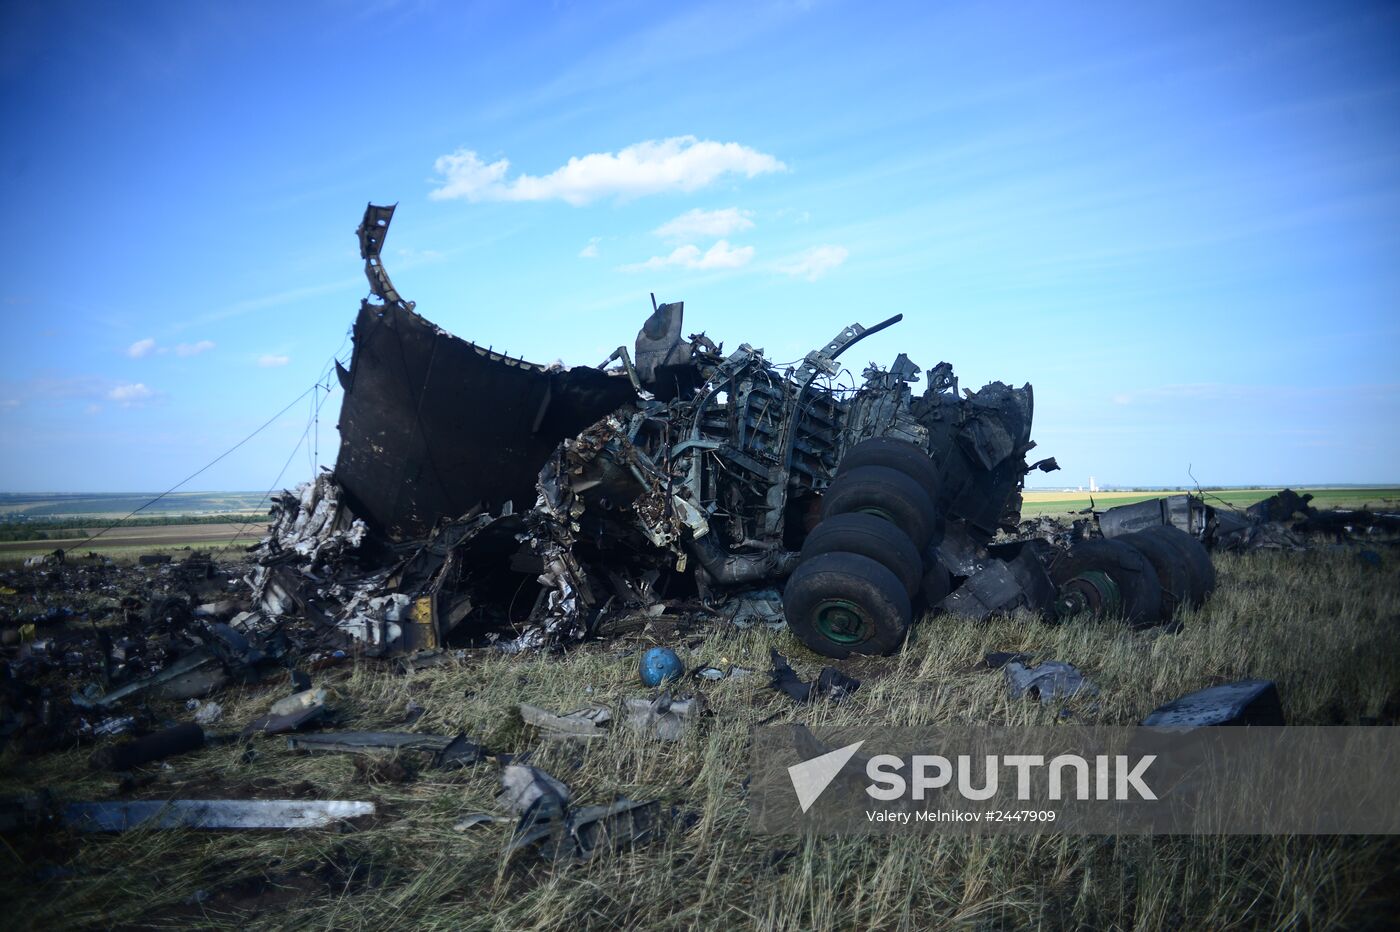 Impact point of Ukrainian Air Force Il-76 downed by Lugansk self-defense